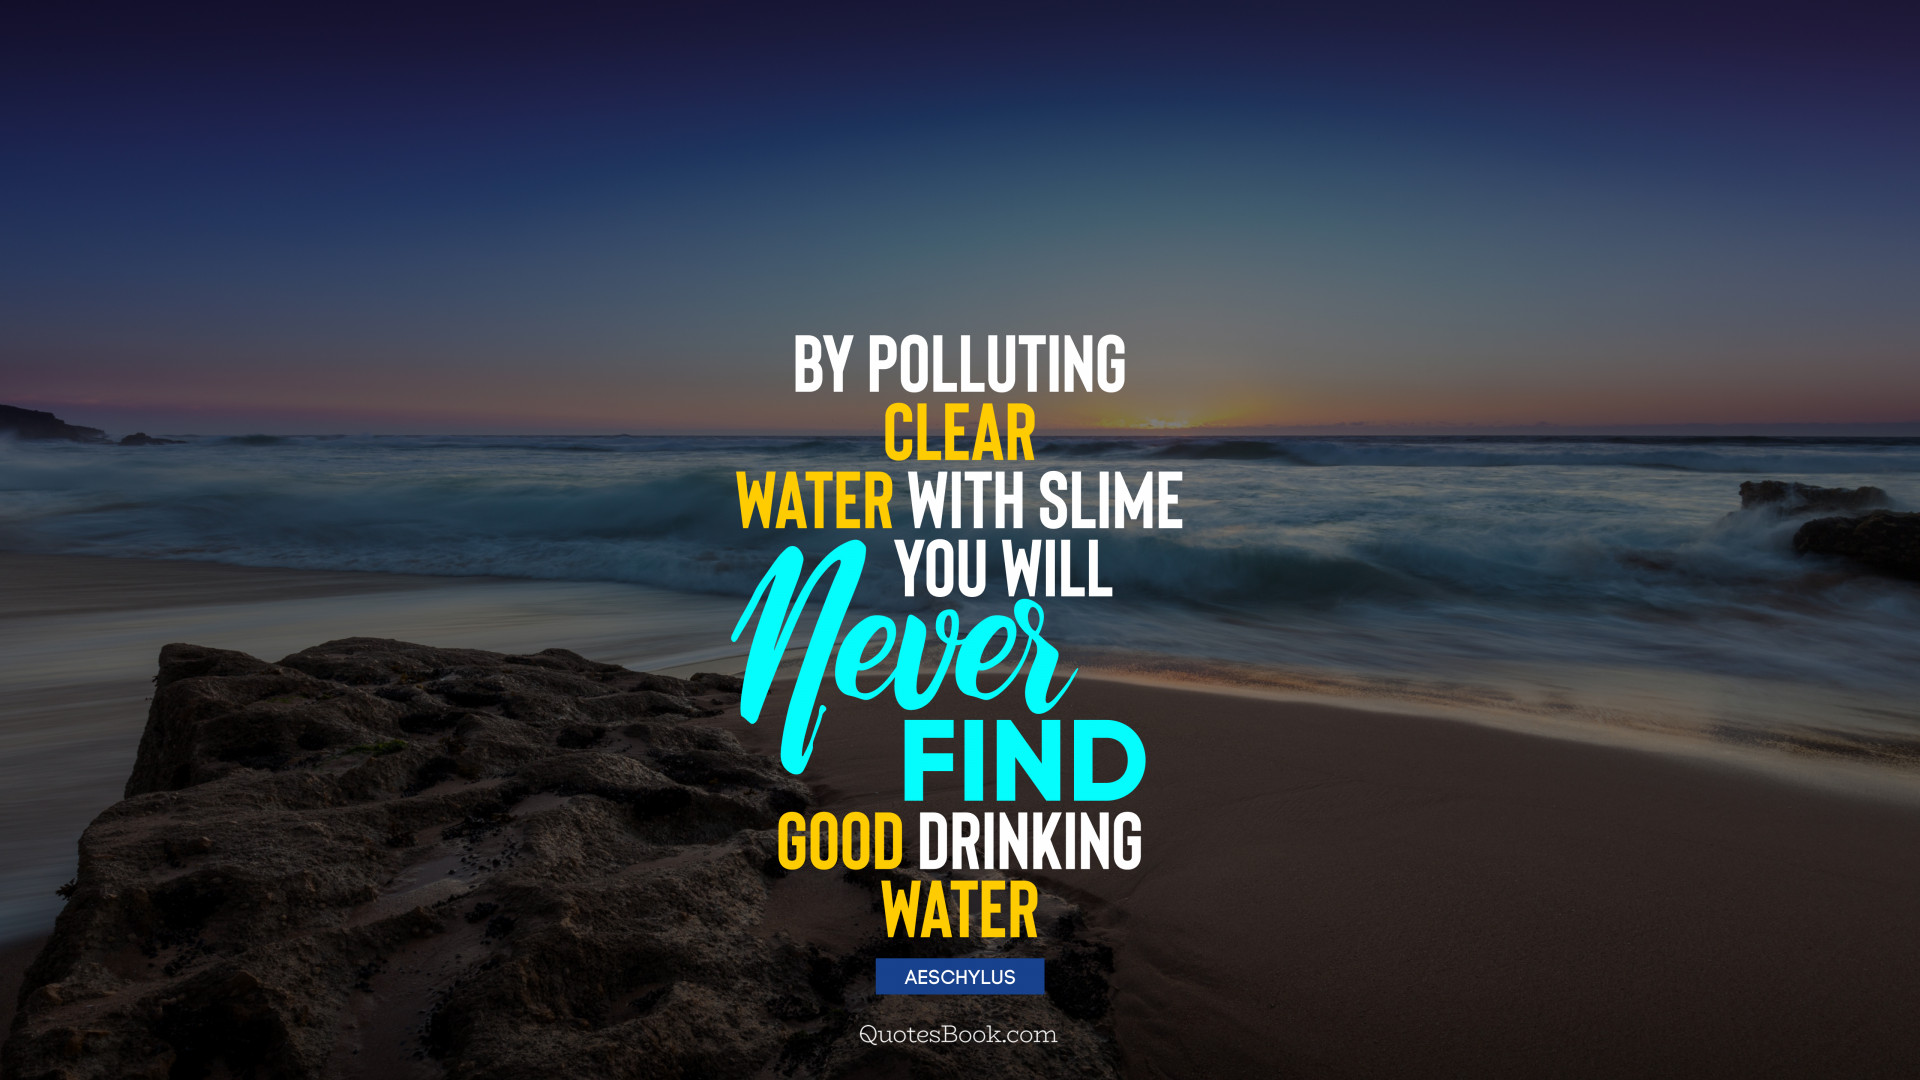 By polluting clear water with slime you will never find good drinking